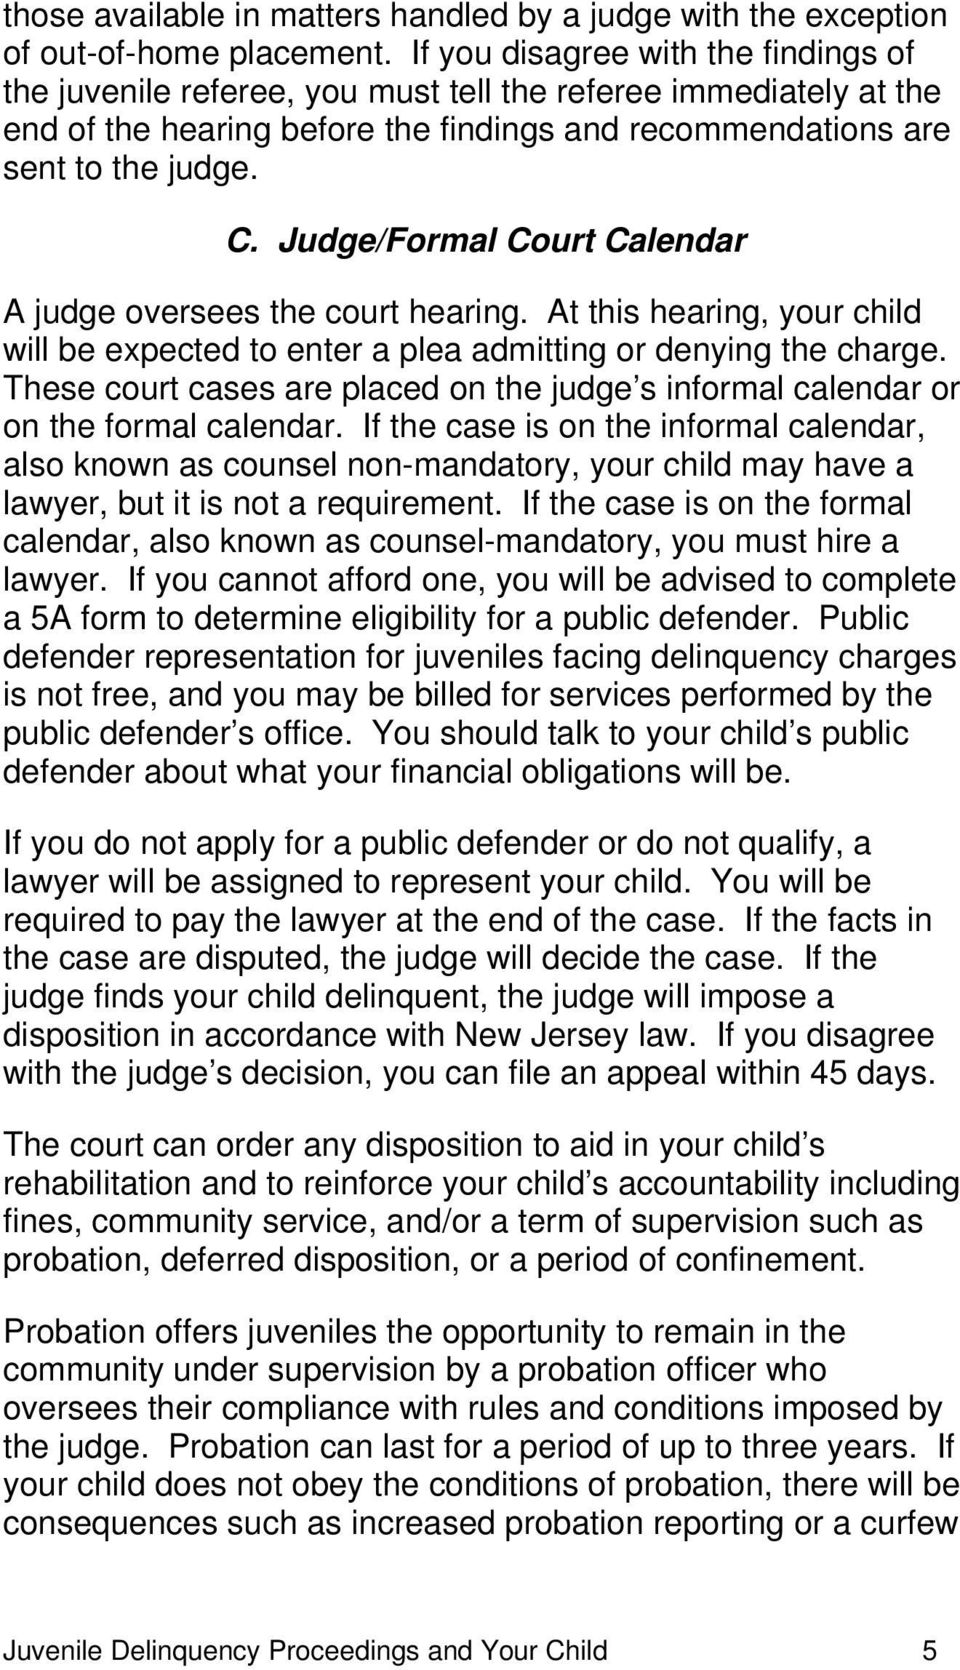 Judge/Formal Court Calendar A judge oversees the court hearing. At this hearing, your child will be expected to enter a plea admitting or denying the charge.